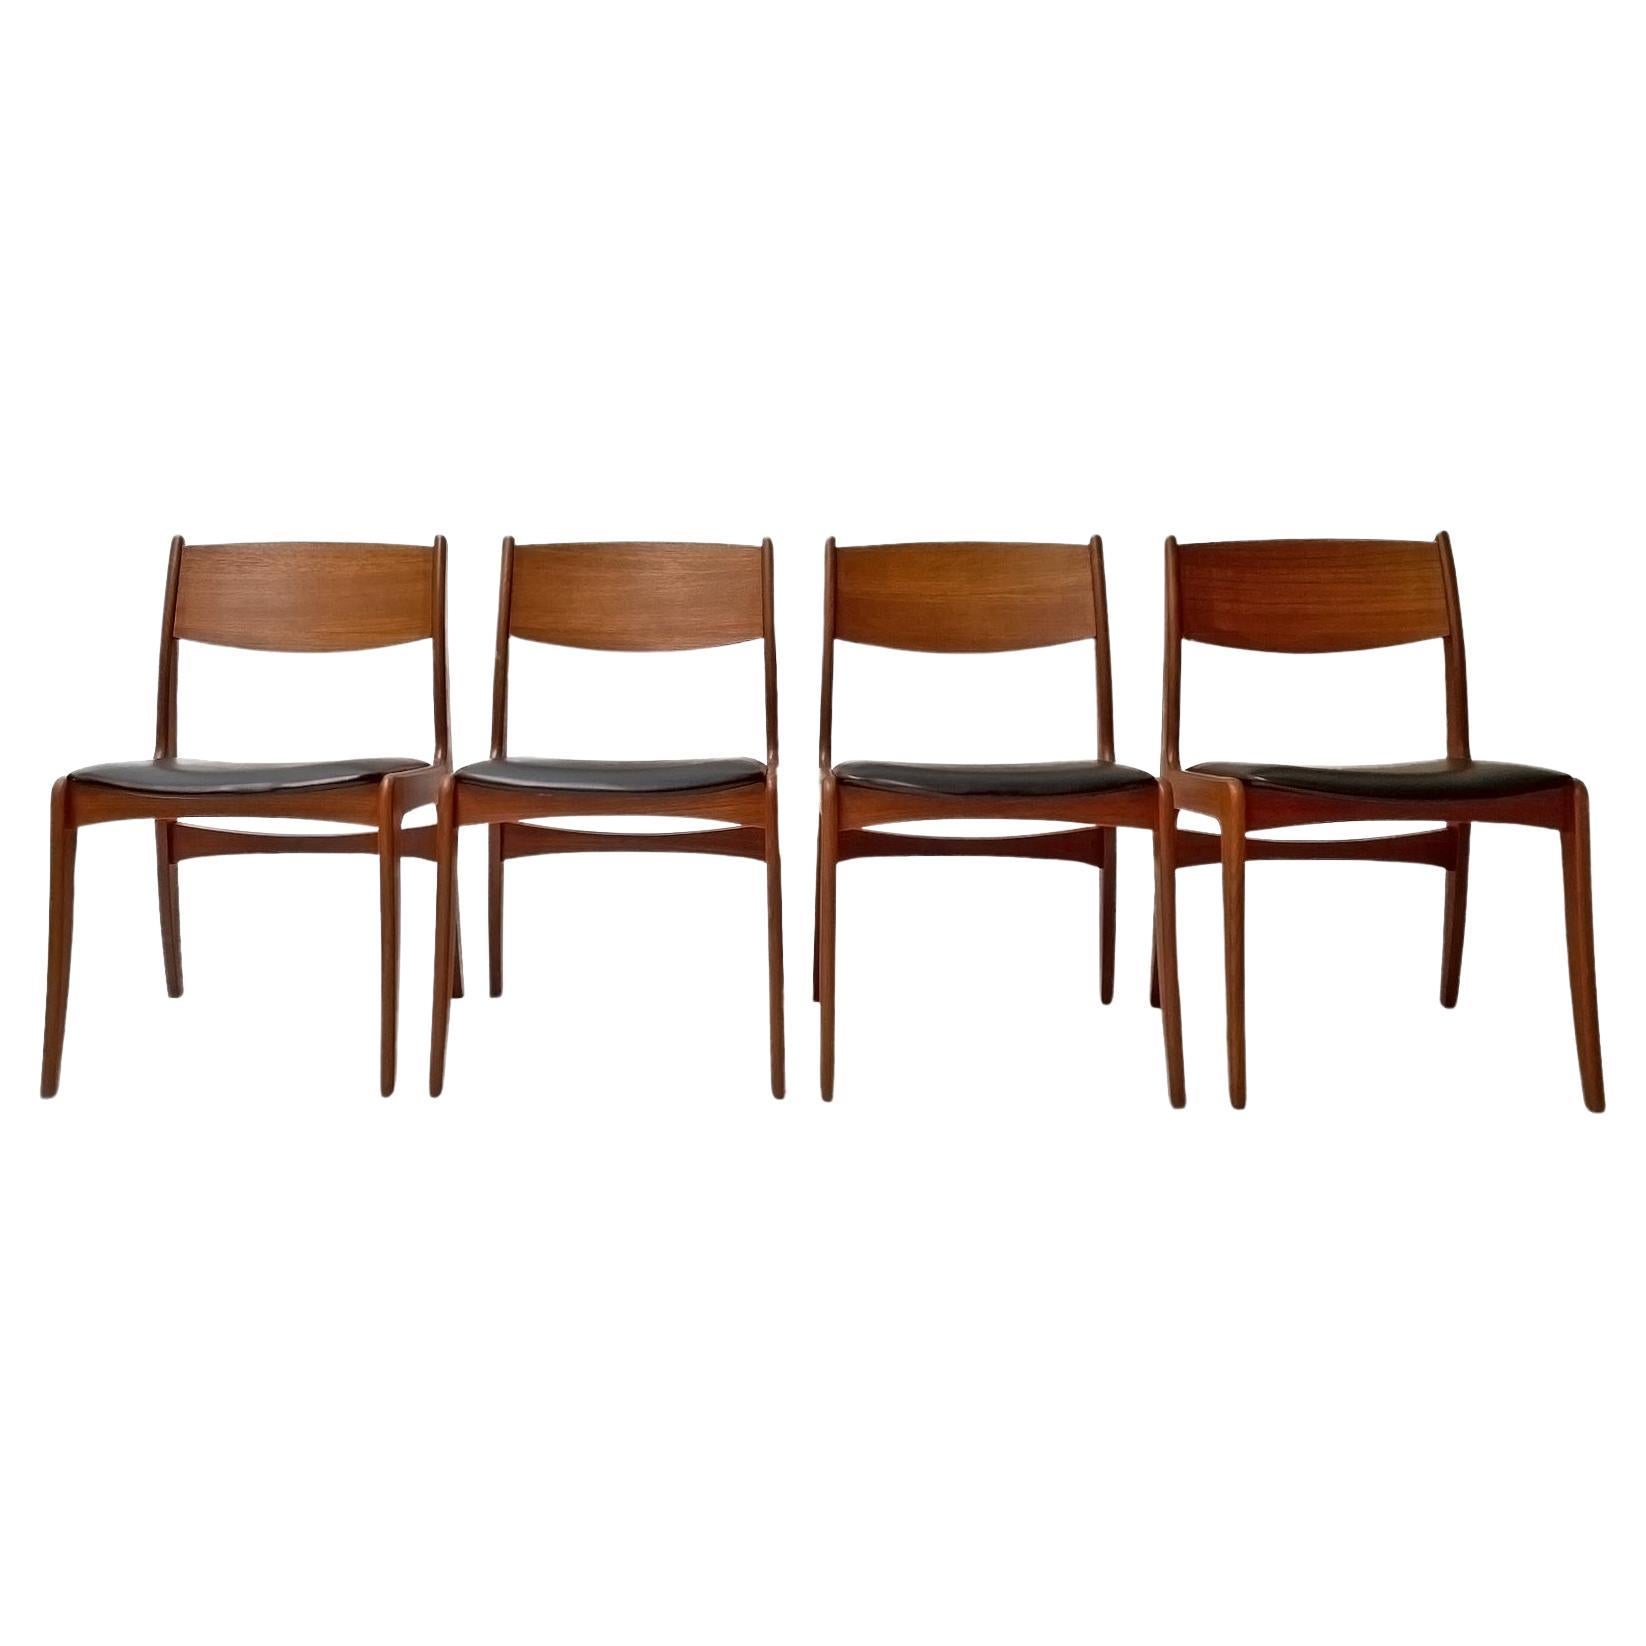 Danish Set of 4 Teak and Black Vinyl Dining Chairs, Mid Century 1960s For Sale